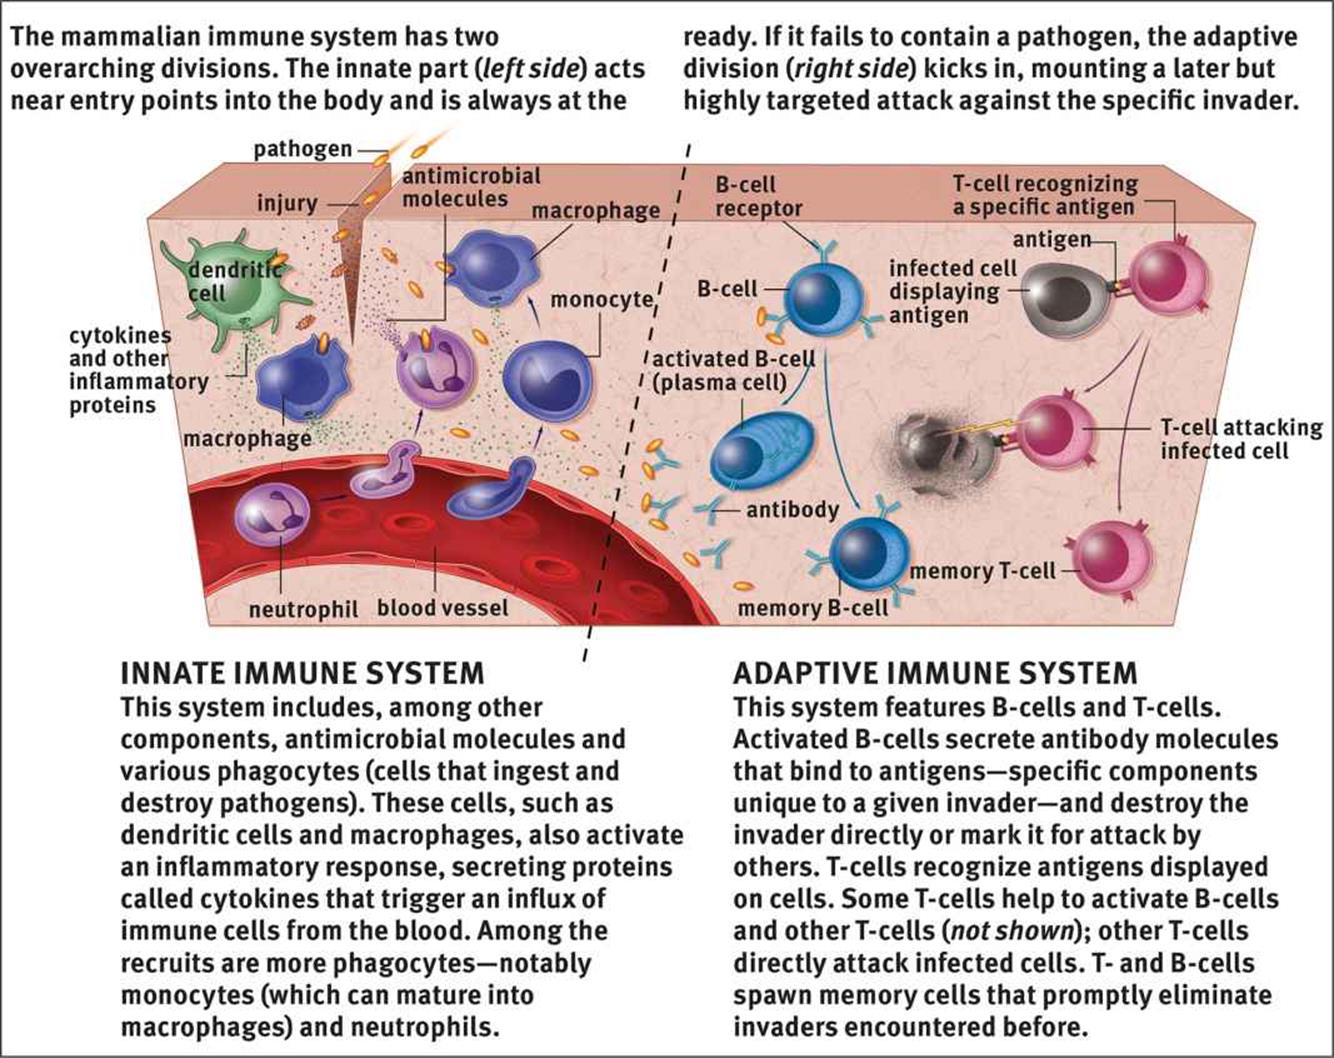 Structure of the Immune System - The Immune System - MCAT Biology Review